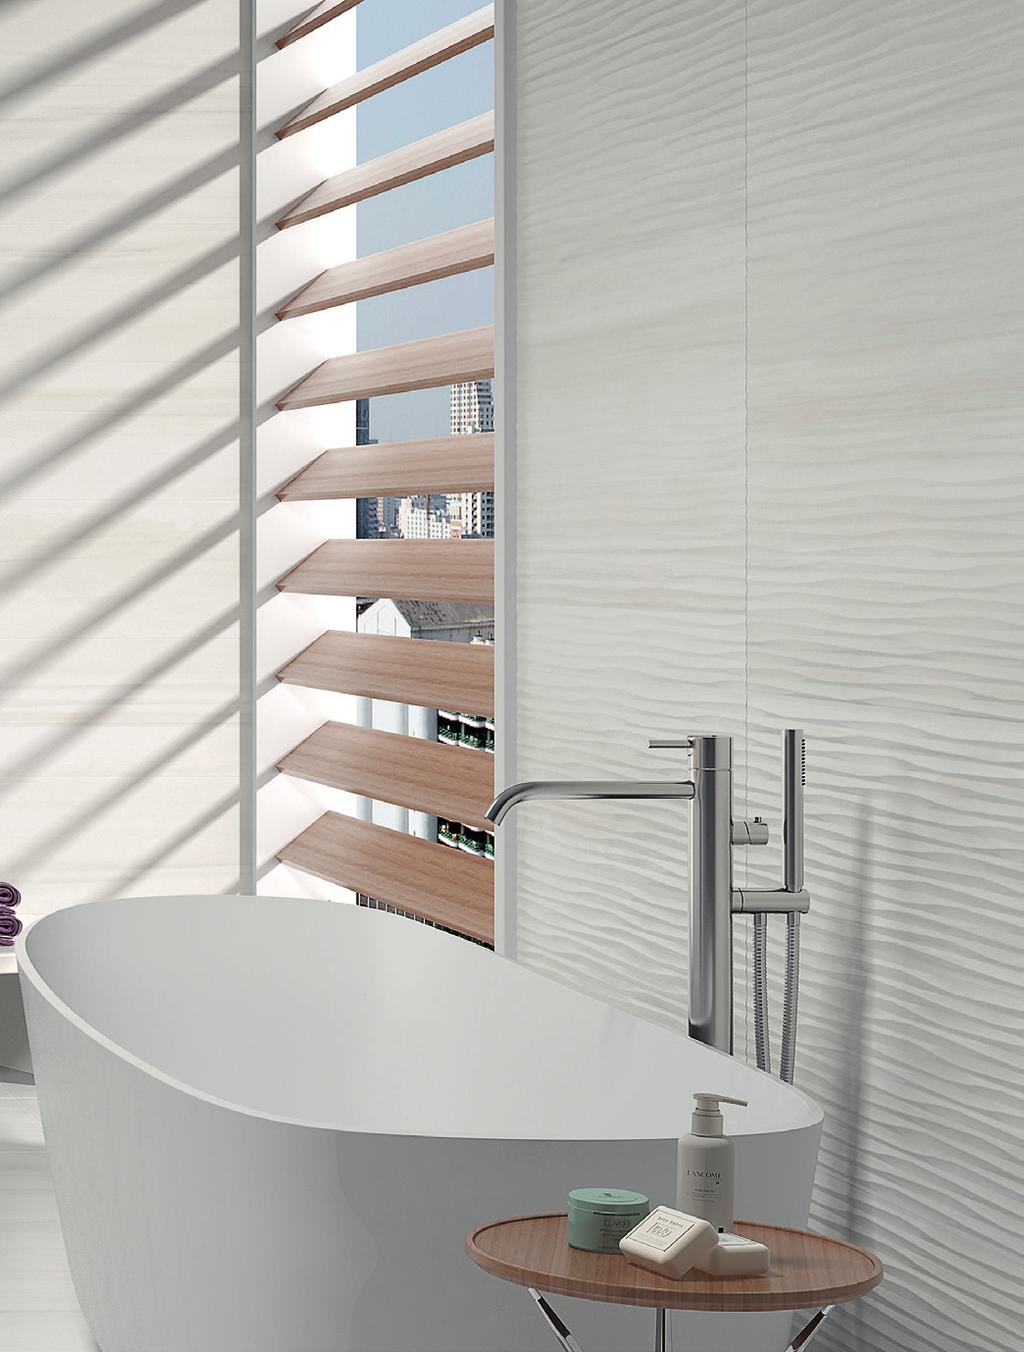 Bonetti Blanco and Blanco Textured Decor Curve appeal A contemporary home looks modern, sleek and is very much up-to-date with design features.